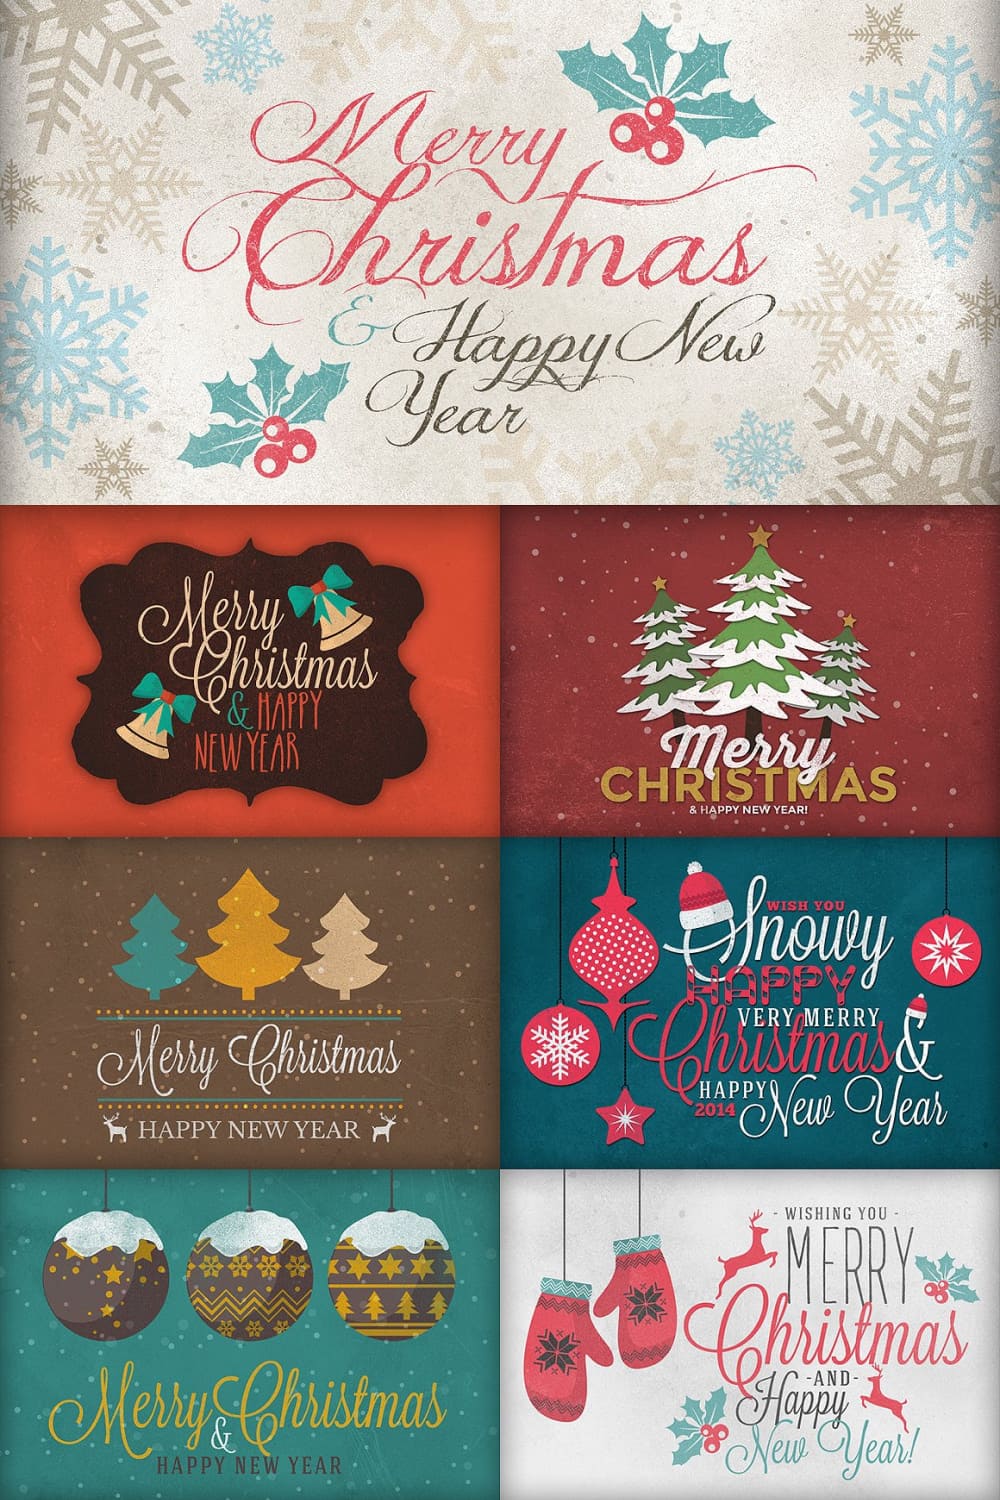 Christmas Background & Cards Vol.1.